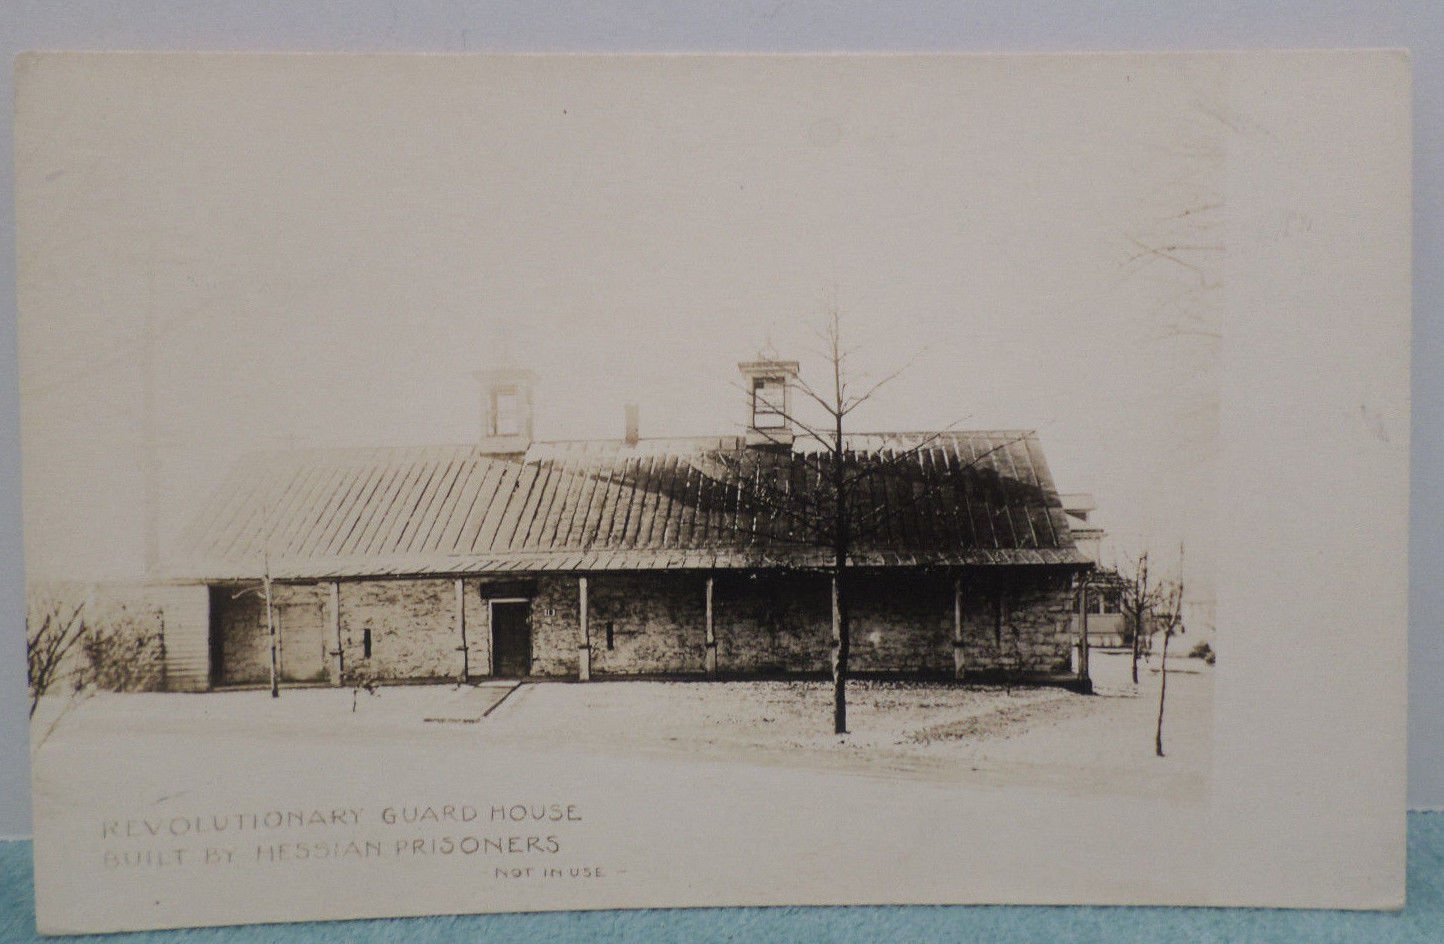 Antique 1907 Postcard of a Revolutionary Guard House Undivided and Unposted